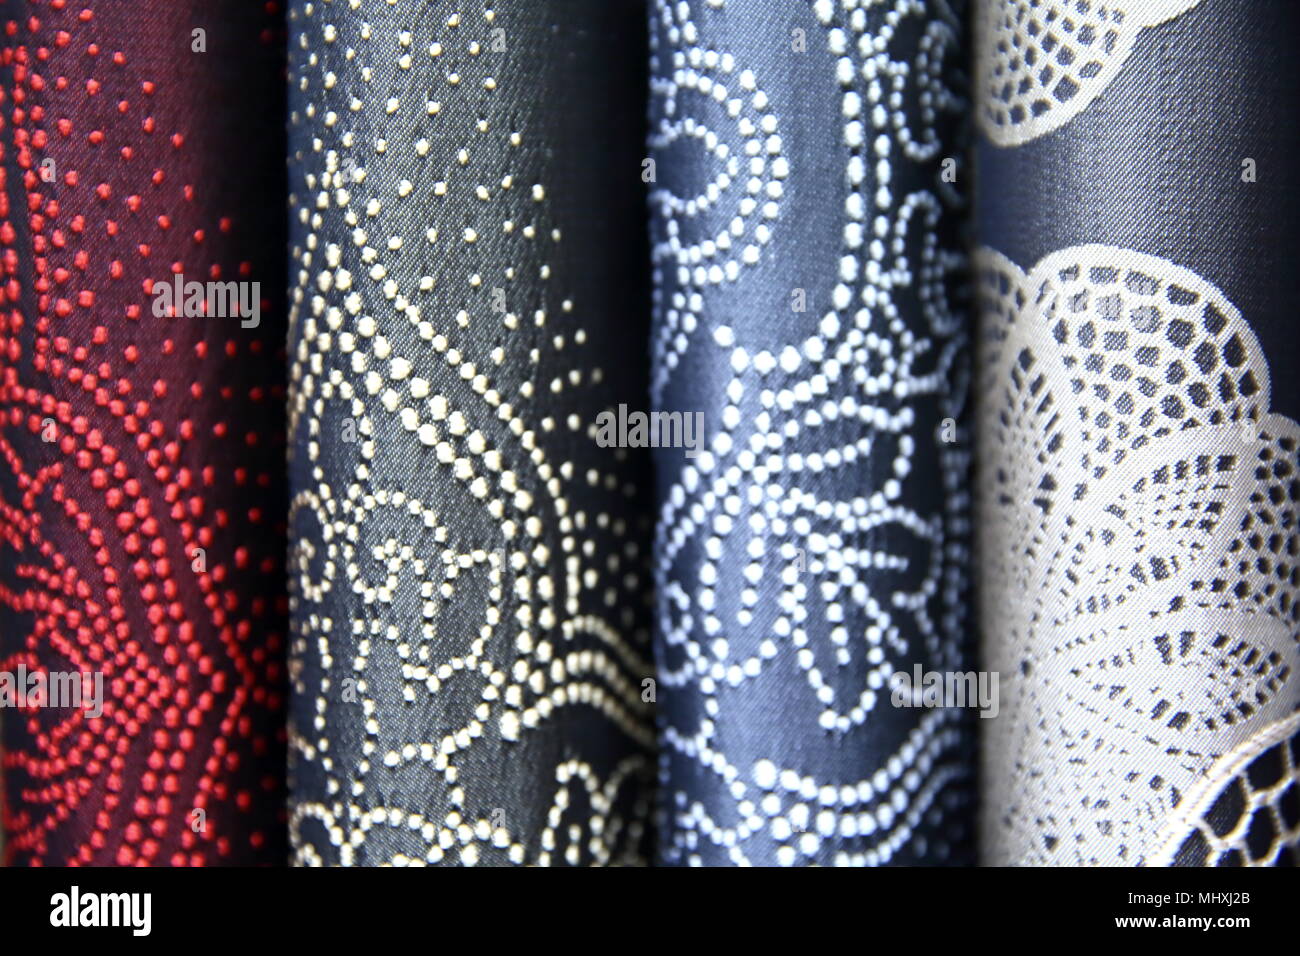 Canvas, Types of Cotton Fabric